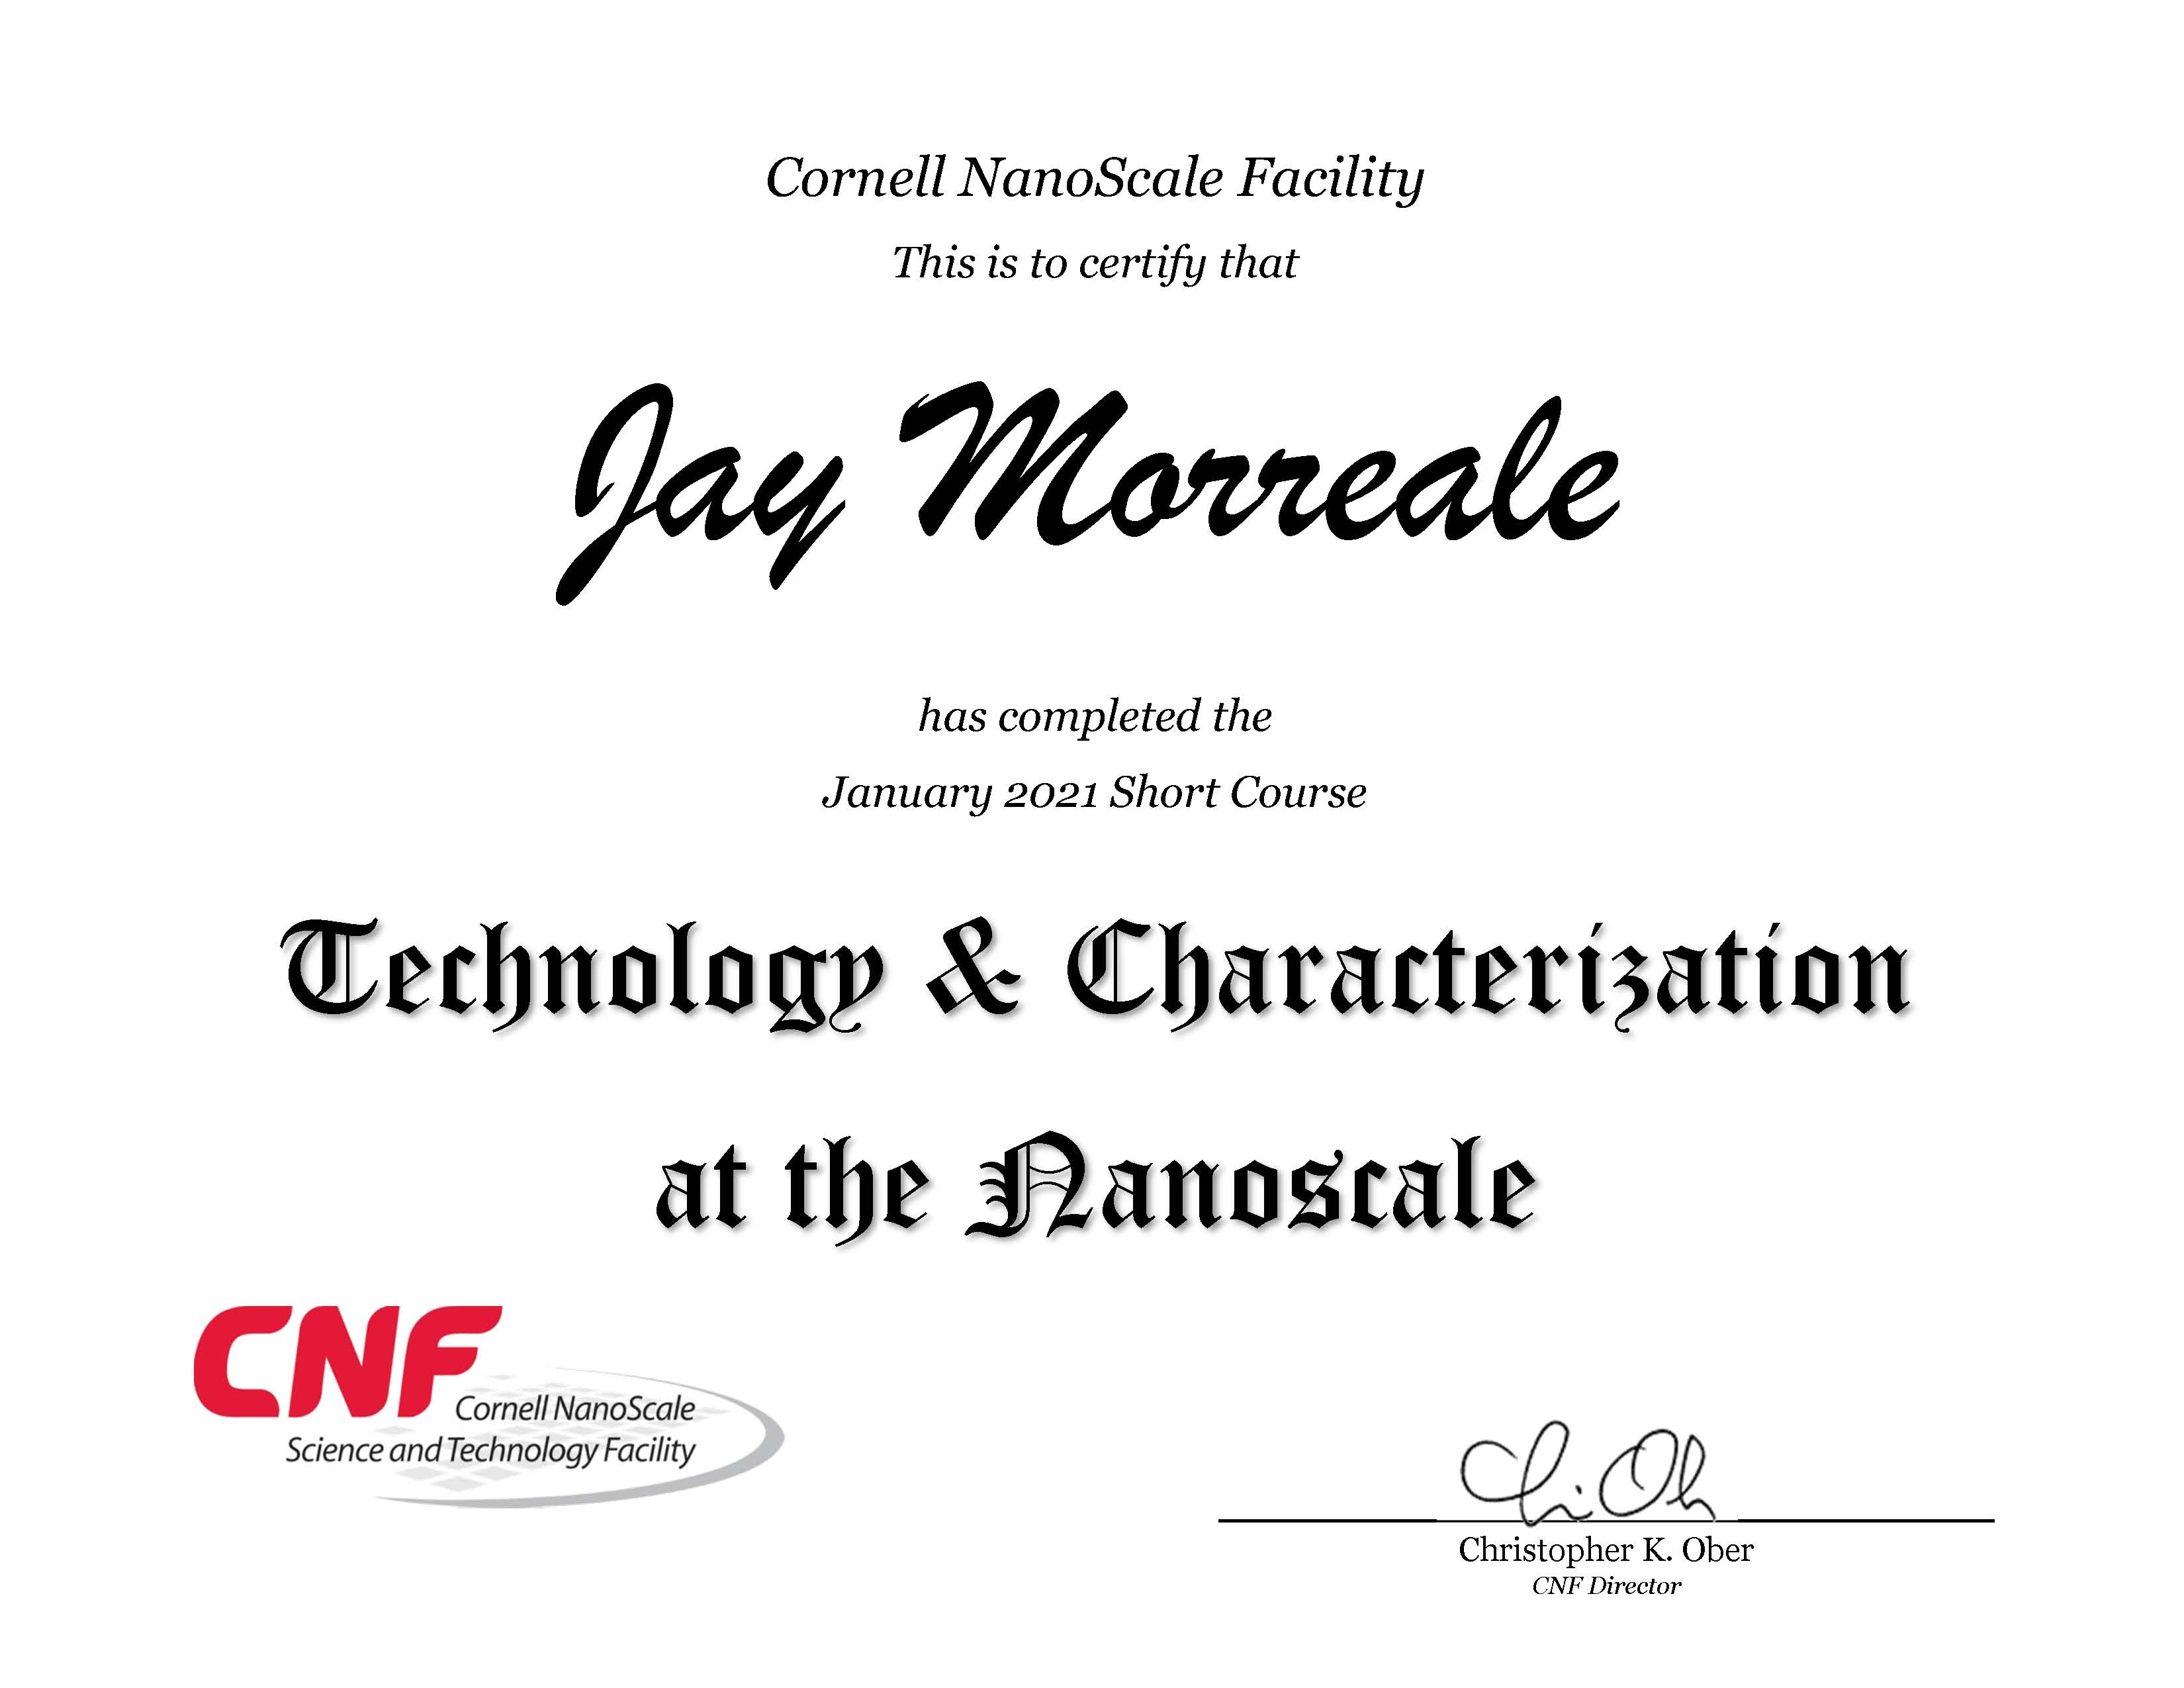 CNF Certificate of Completion